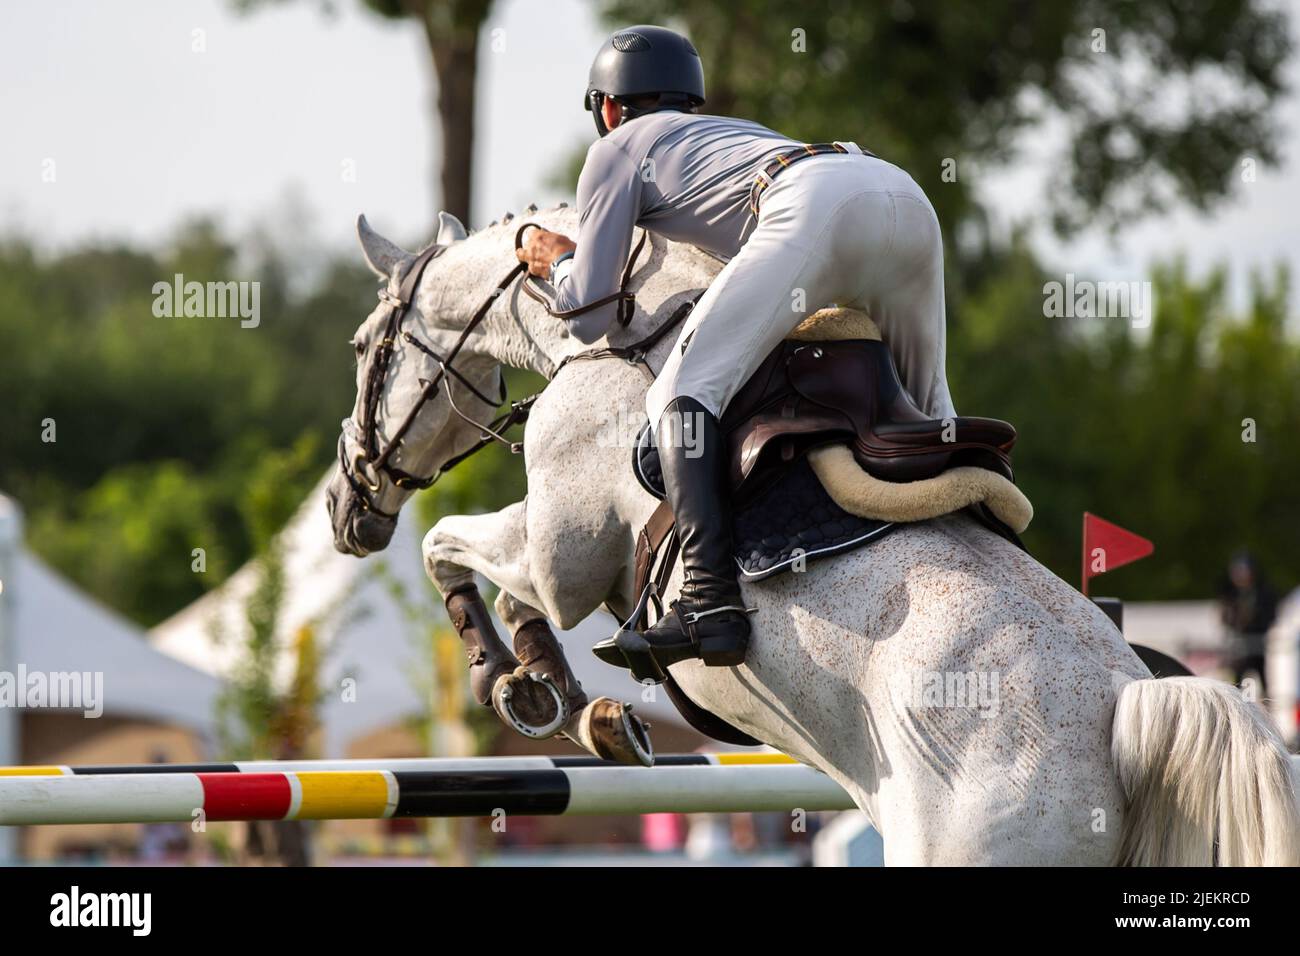 Horse Jumping, Equestrian Sports, Show Jumping themed photograph Stock Photo